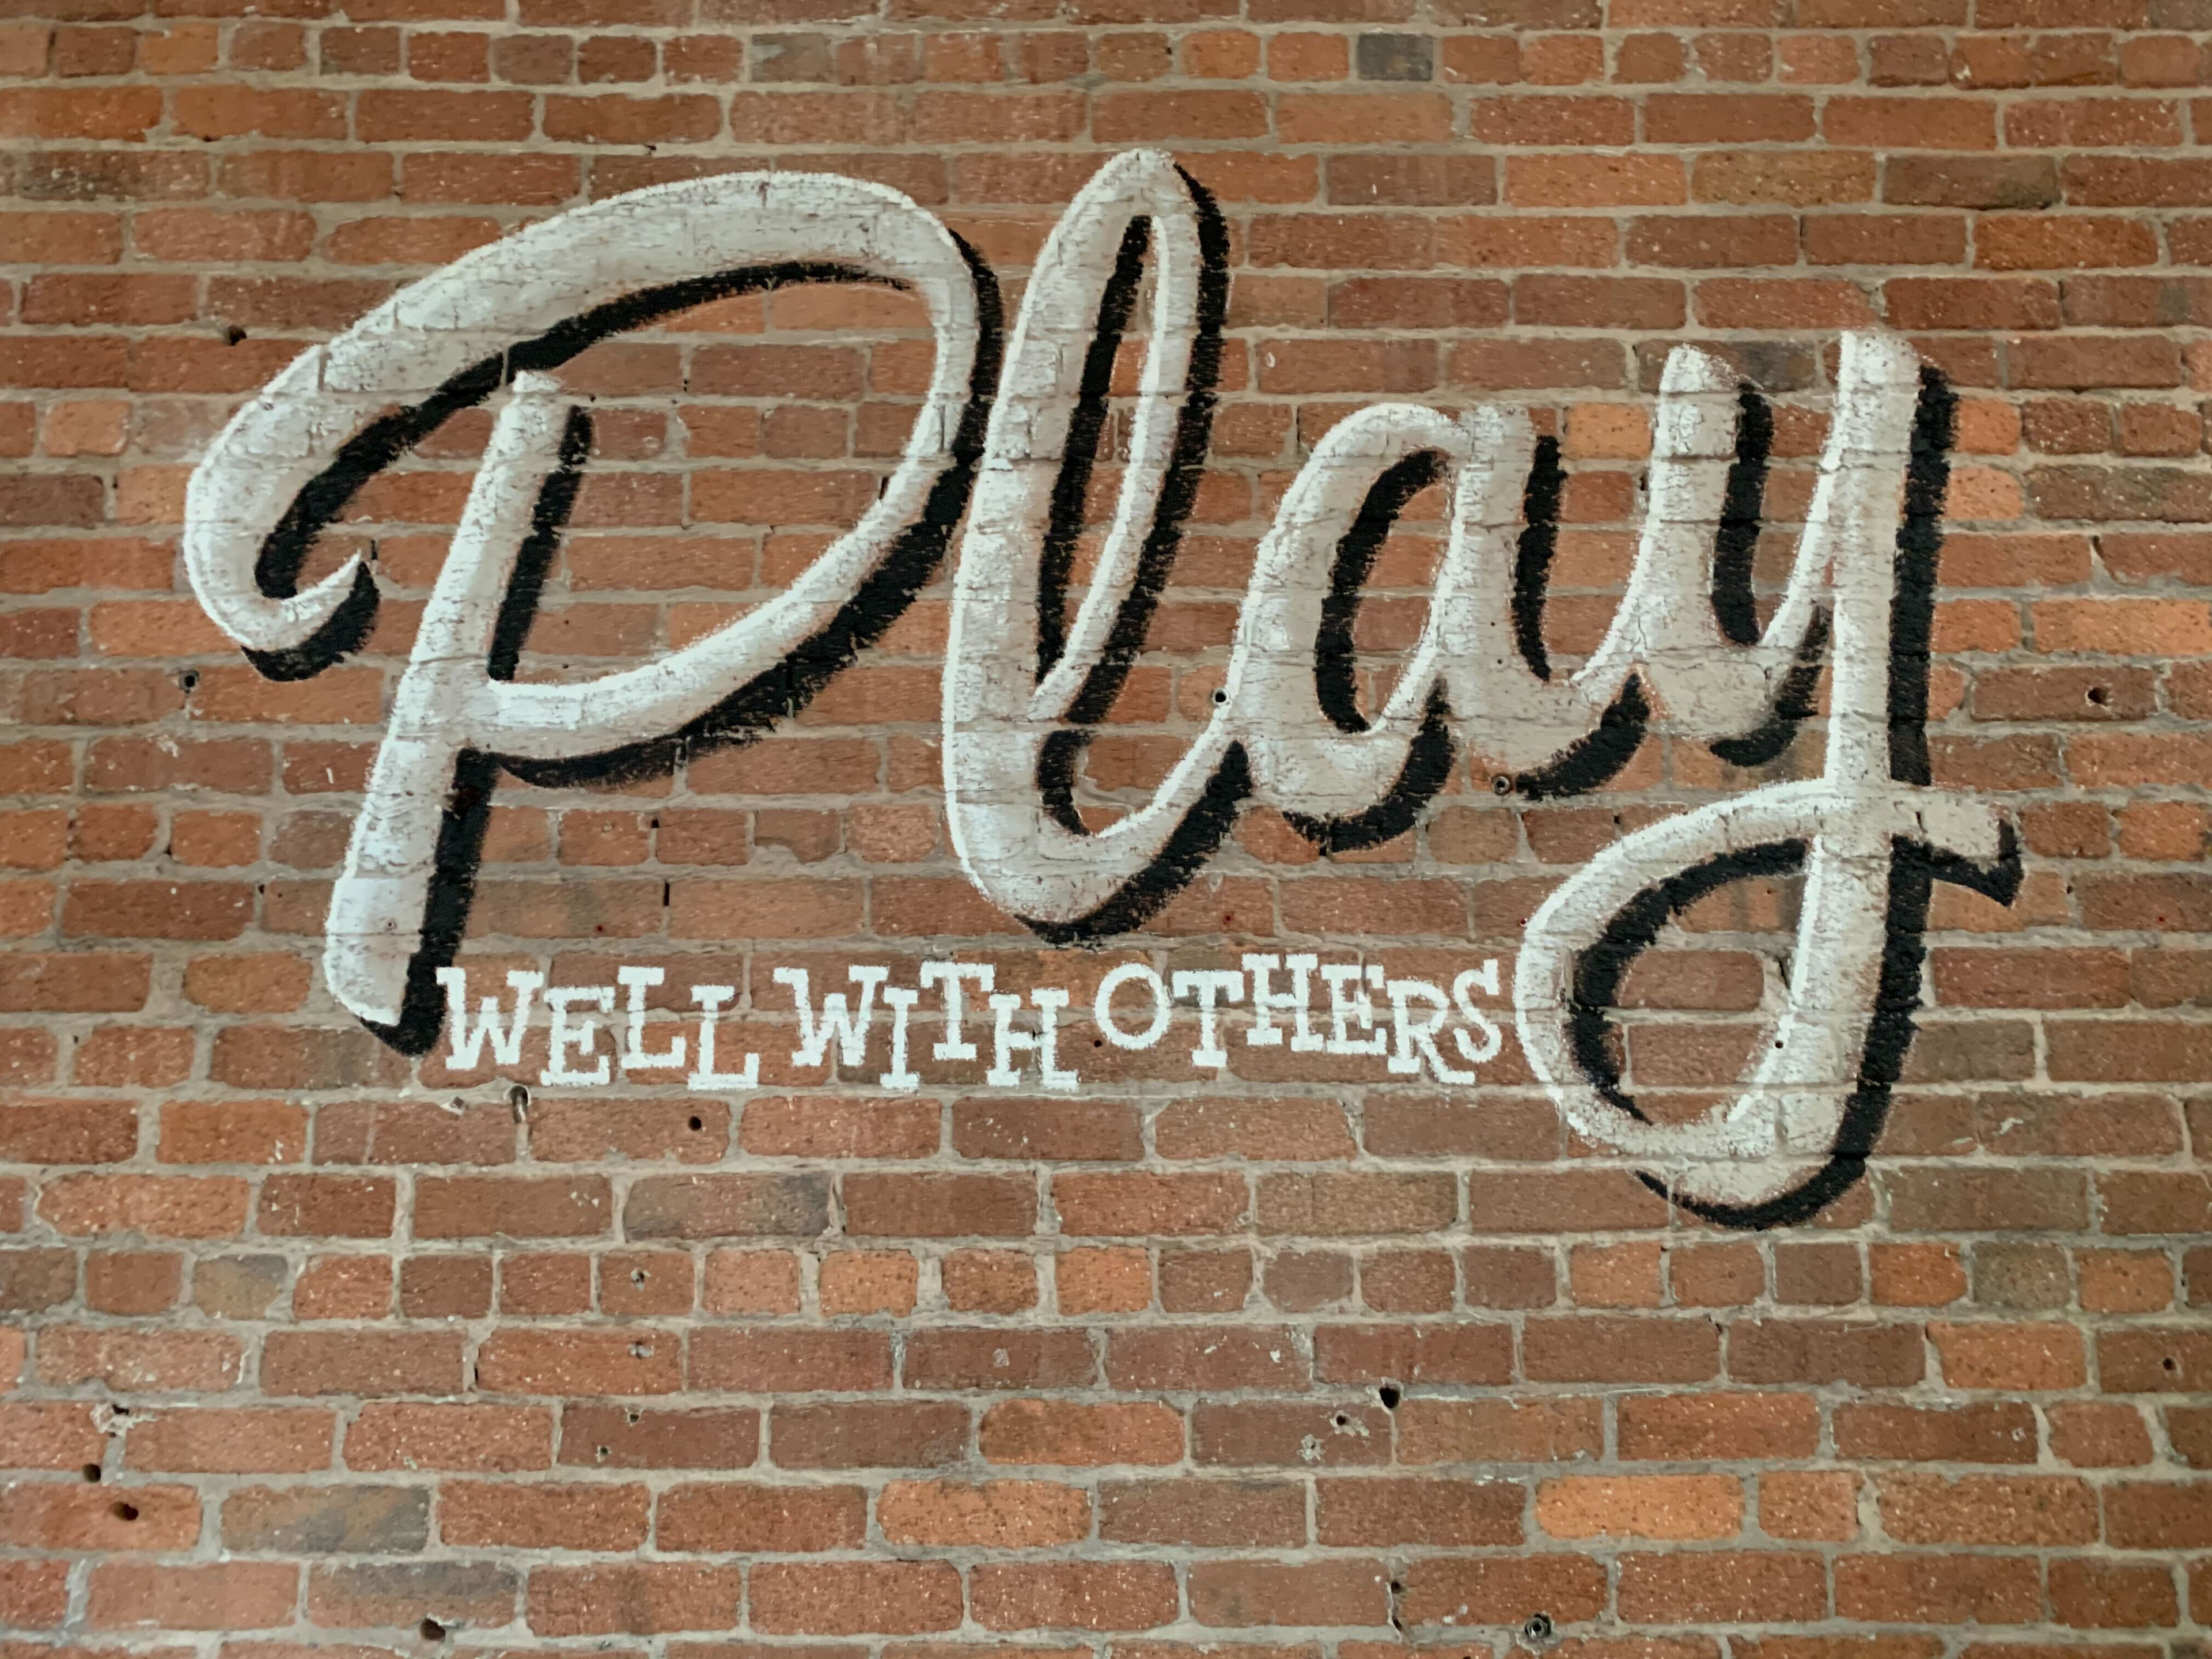 A sign on a brick wall that reads "Play well with others"